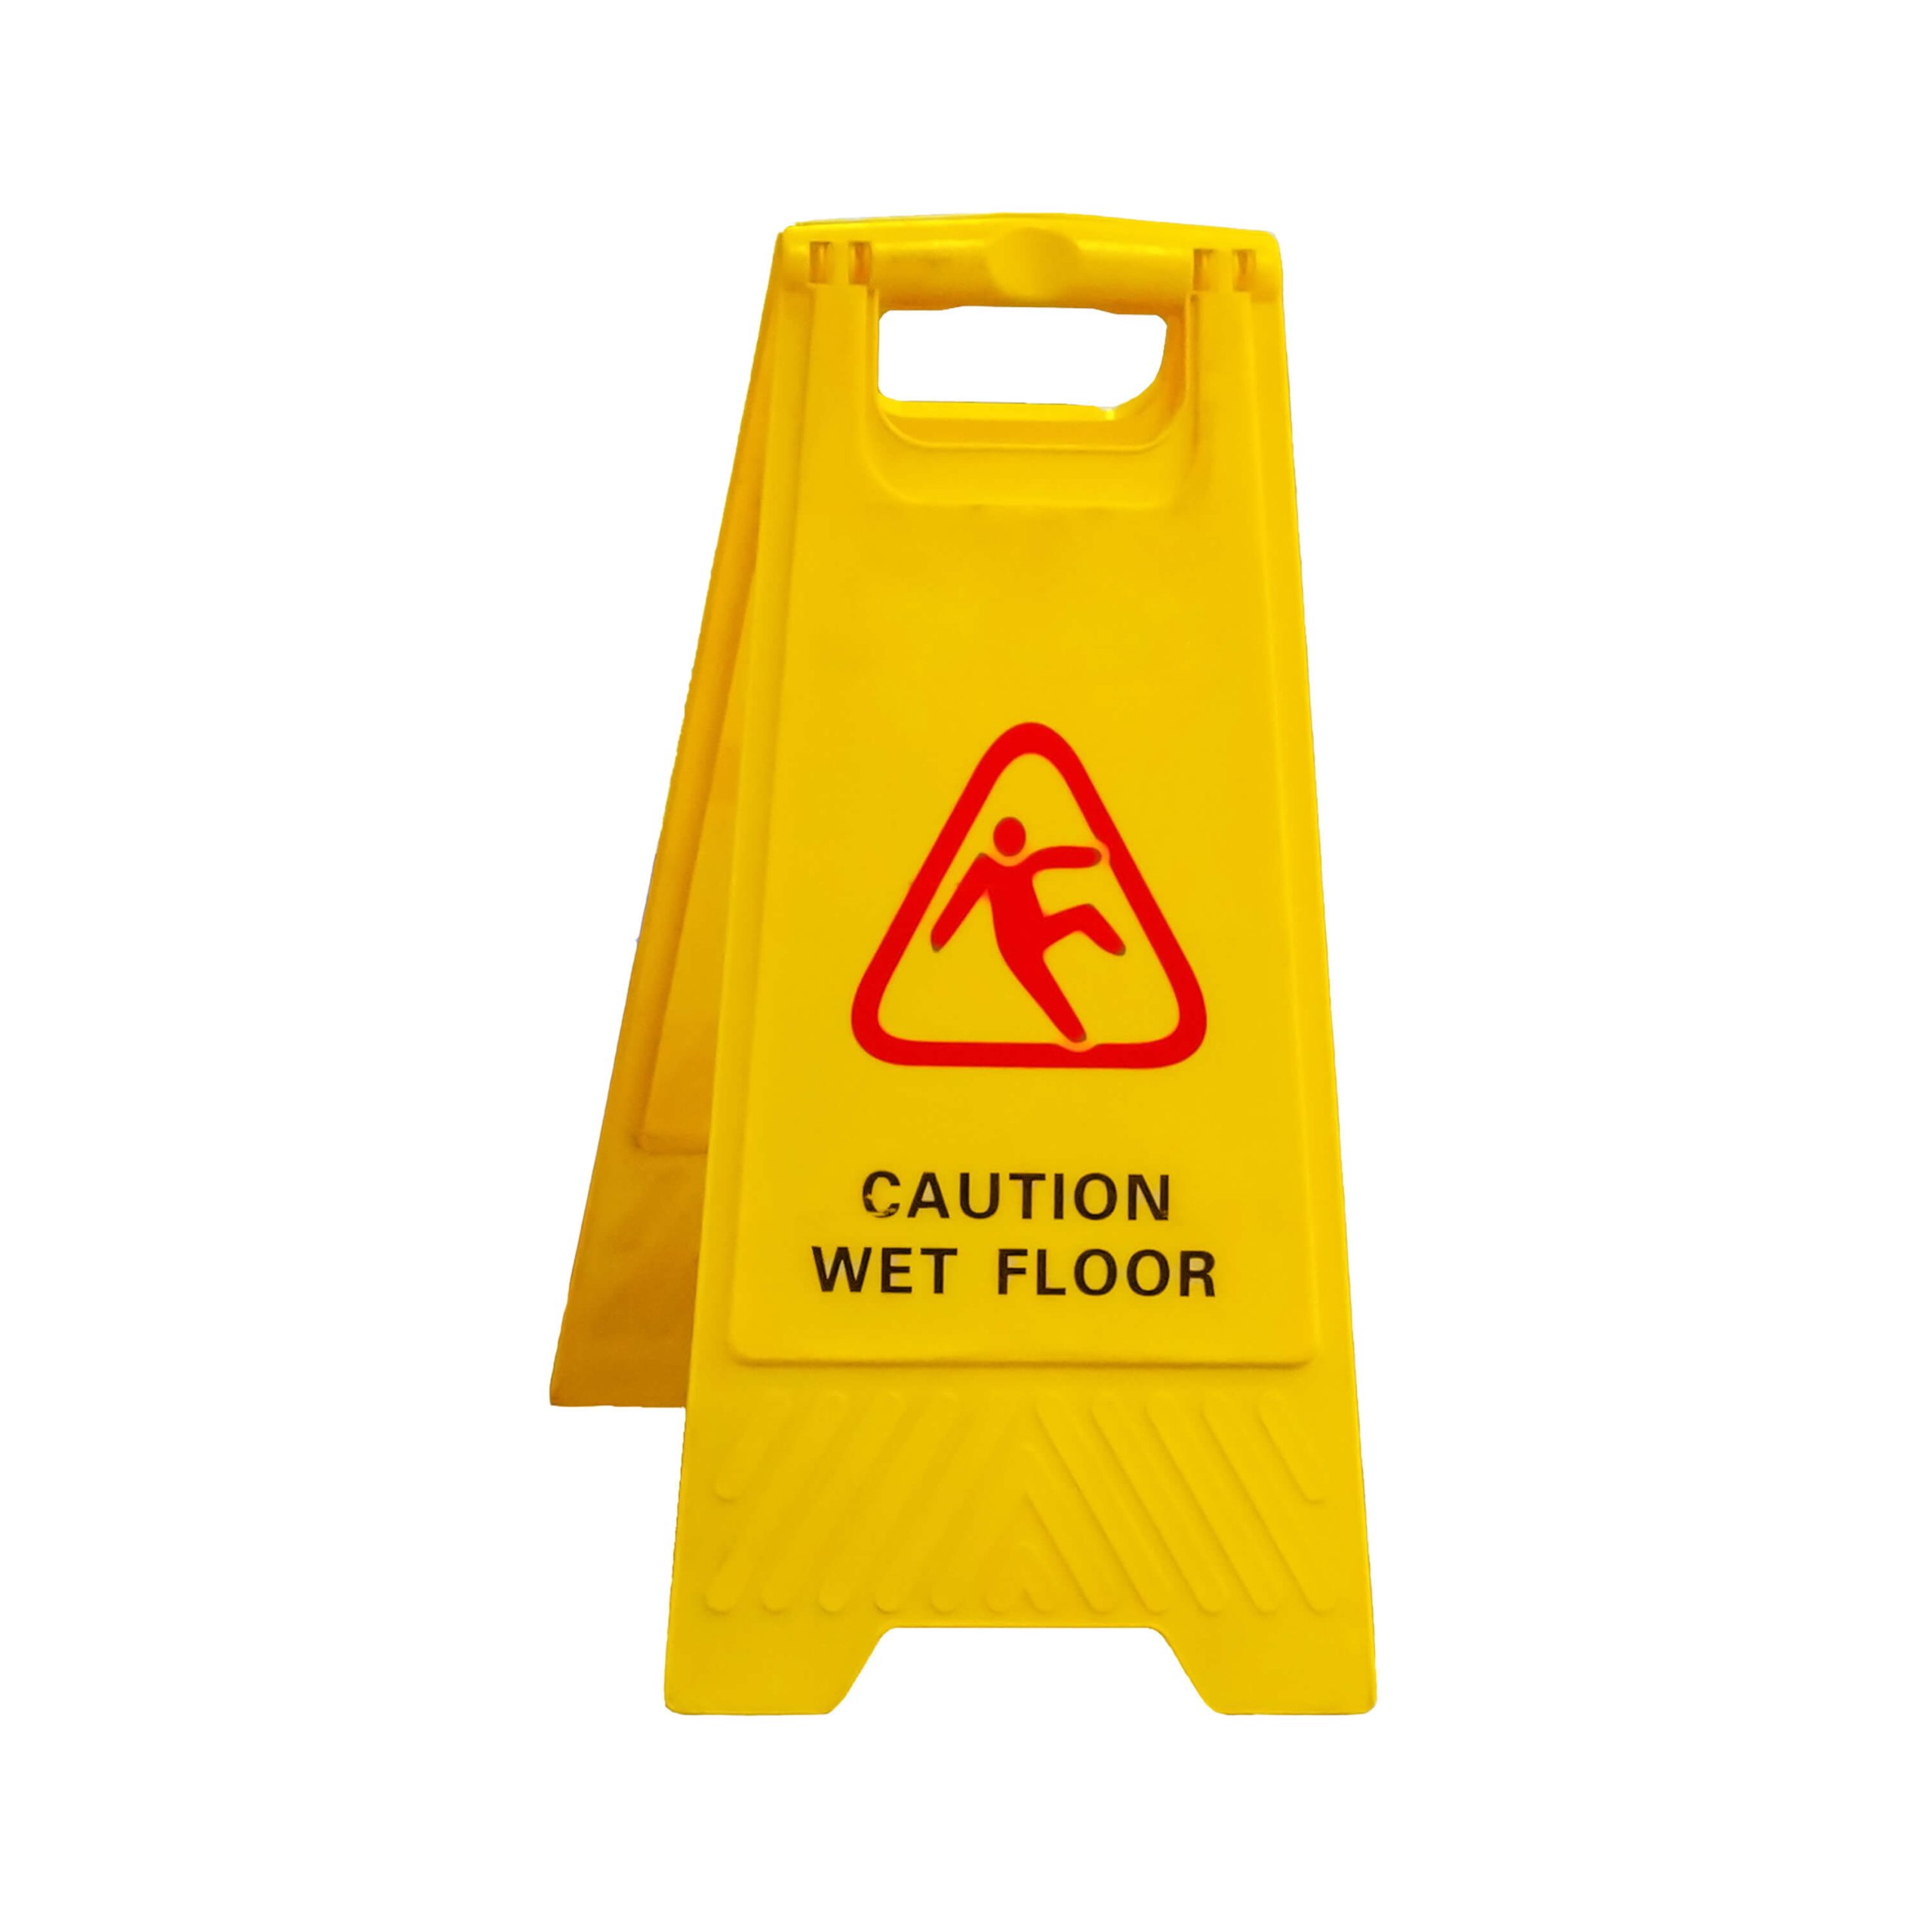 An image of one of our Workplace Hazard Signs.